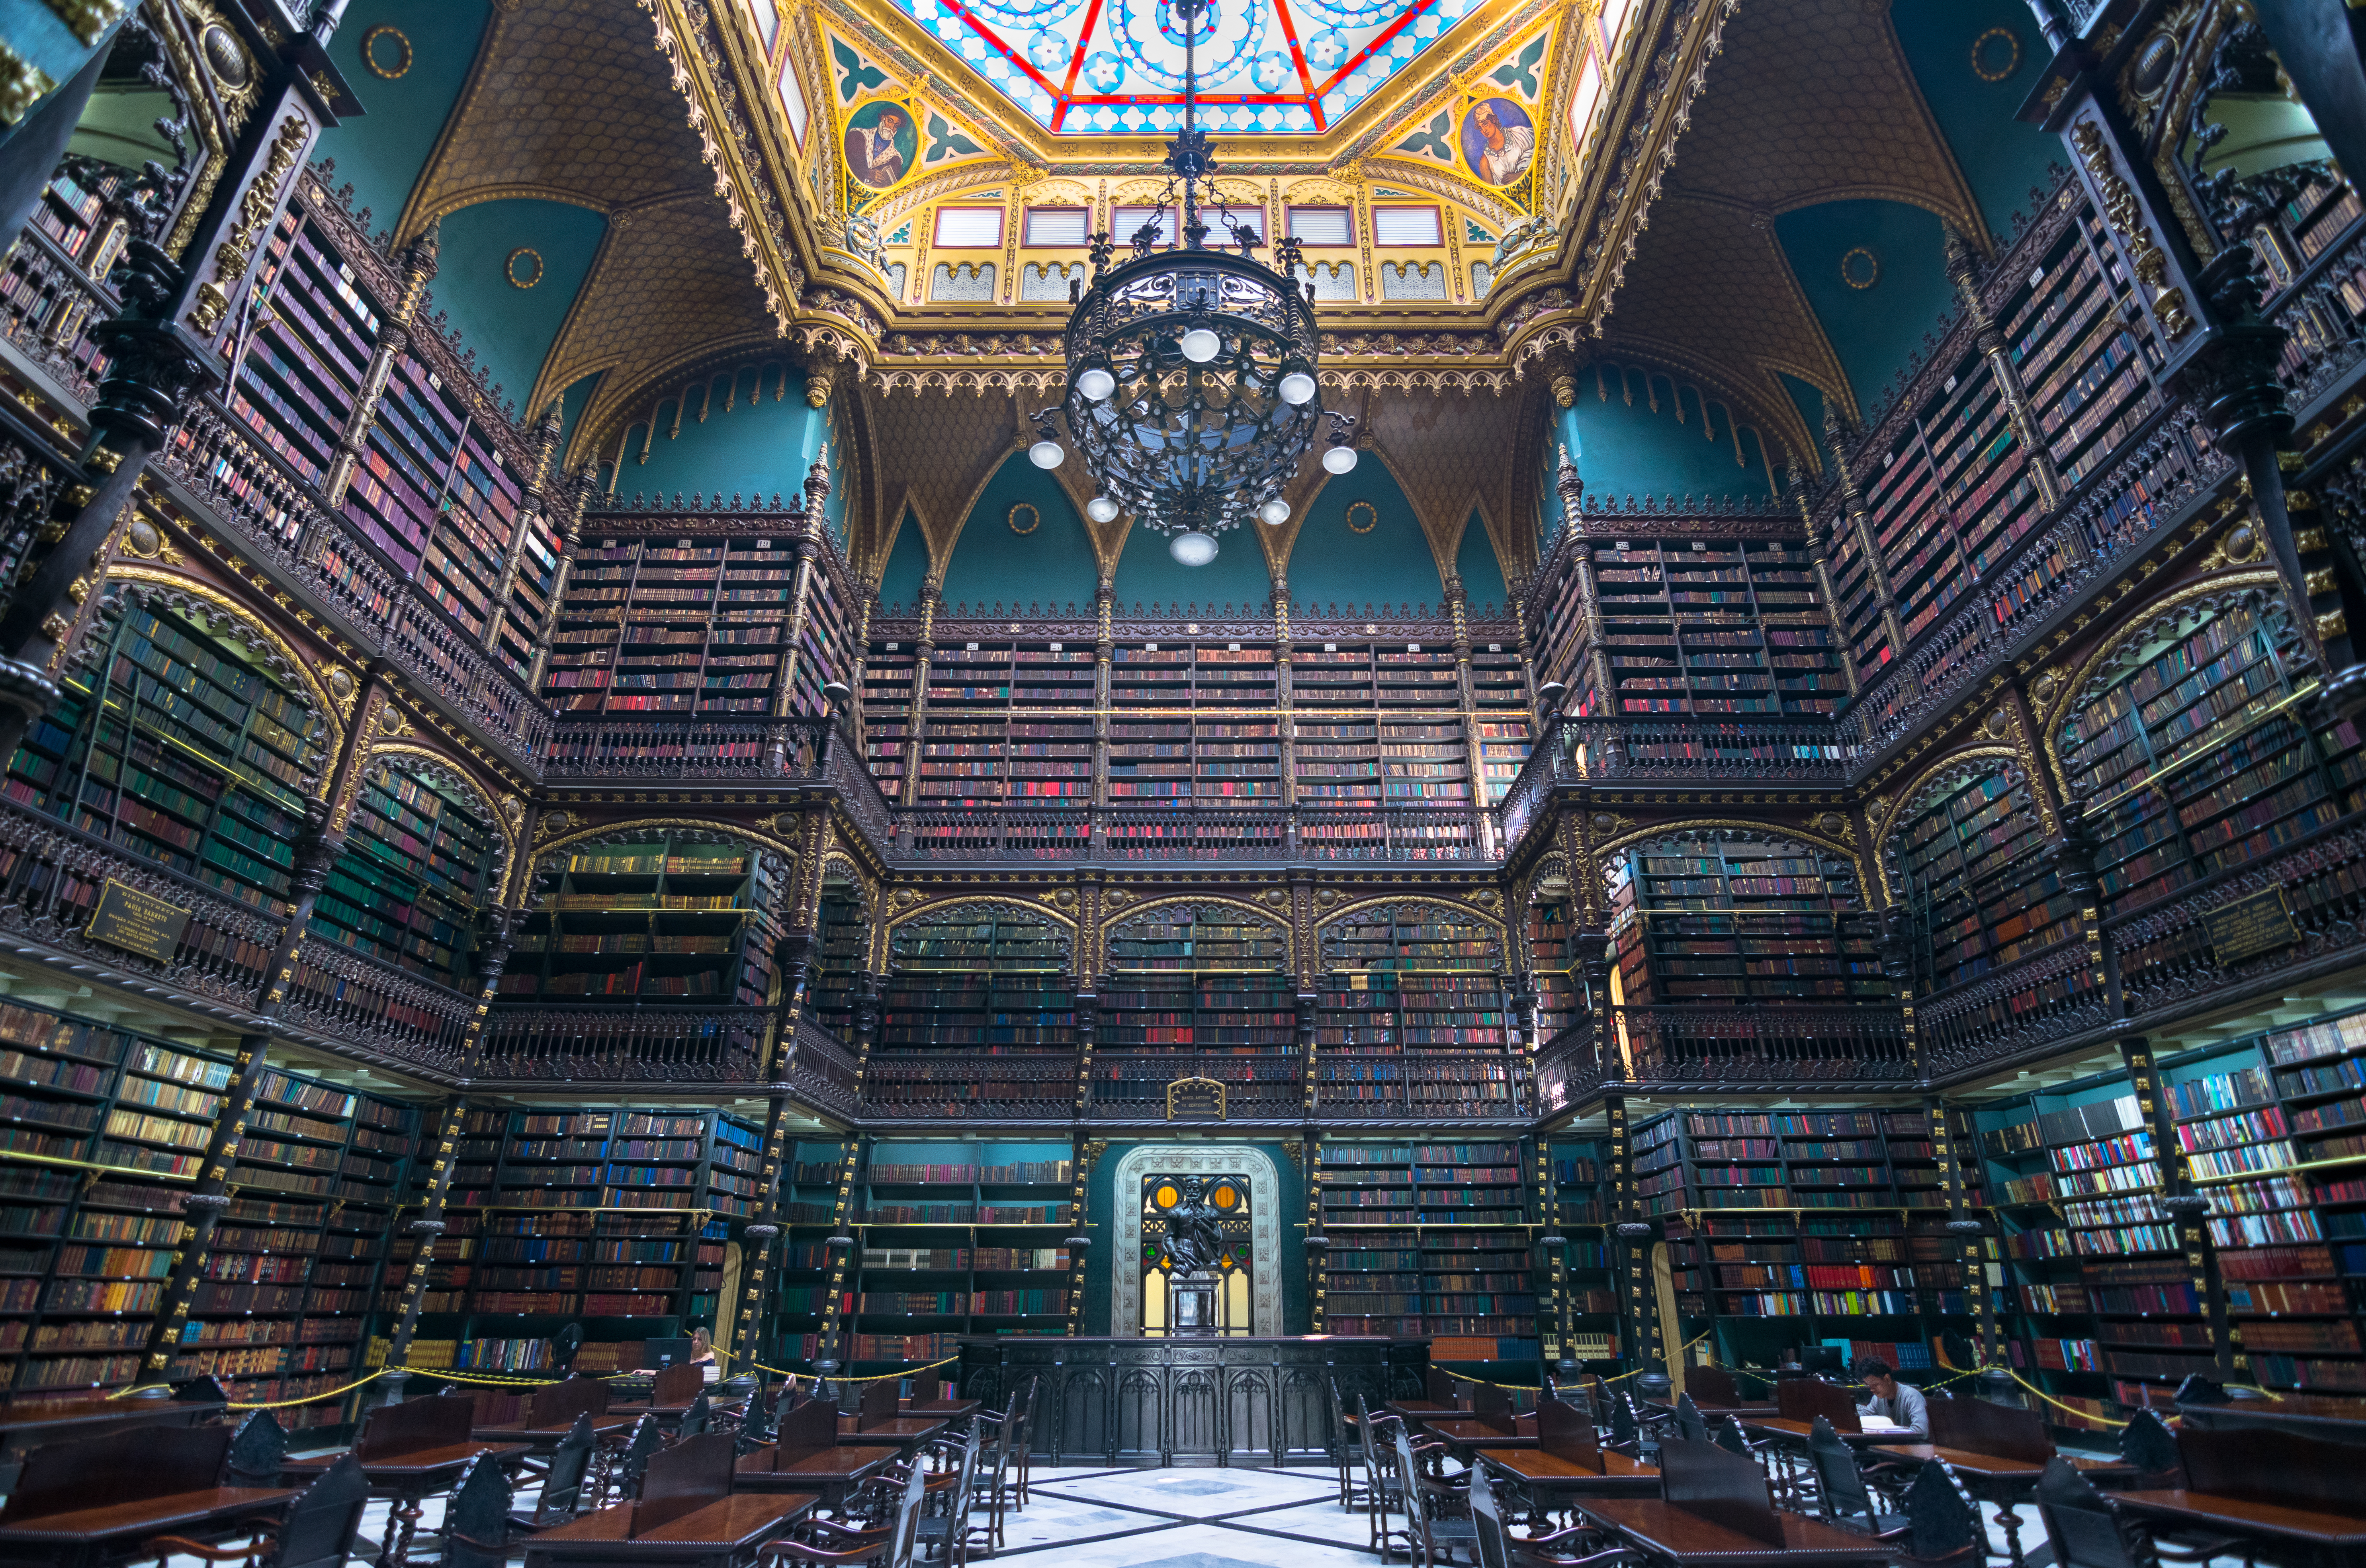 The interior of a library, gilded and decorated in an extravagant style. The walls are densely packed with books over three floors. A chandelier is suspended from the ceiling, which is painted in part with what appears to be gold leaf. The centre of the space is empty other than tables and chairs.